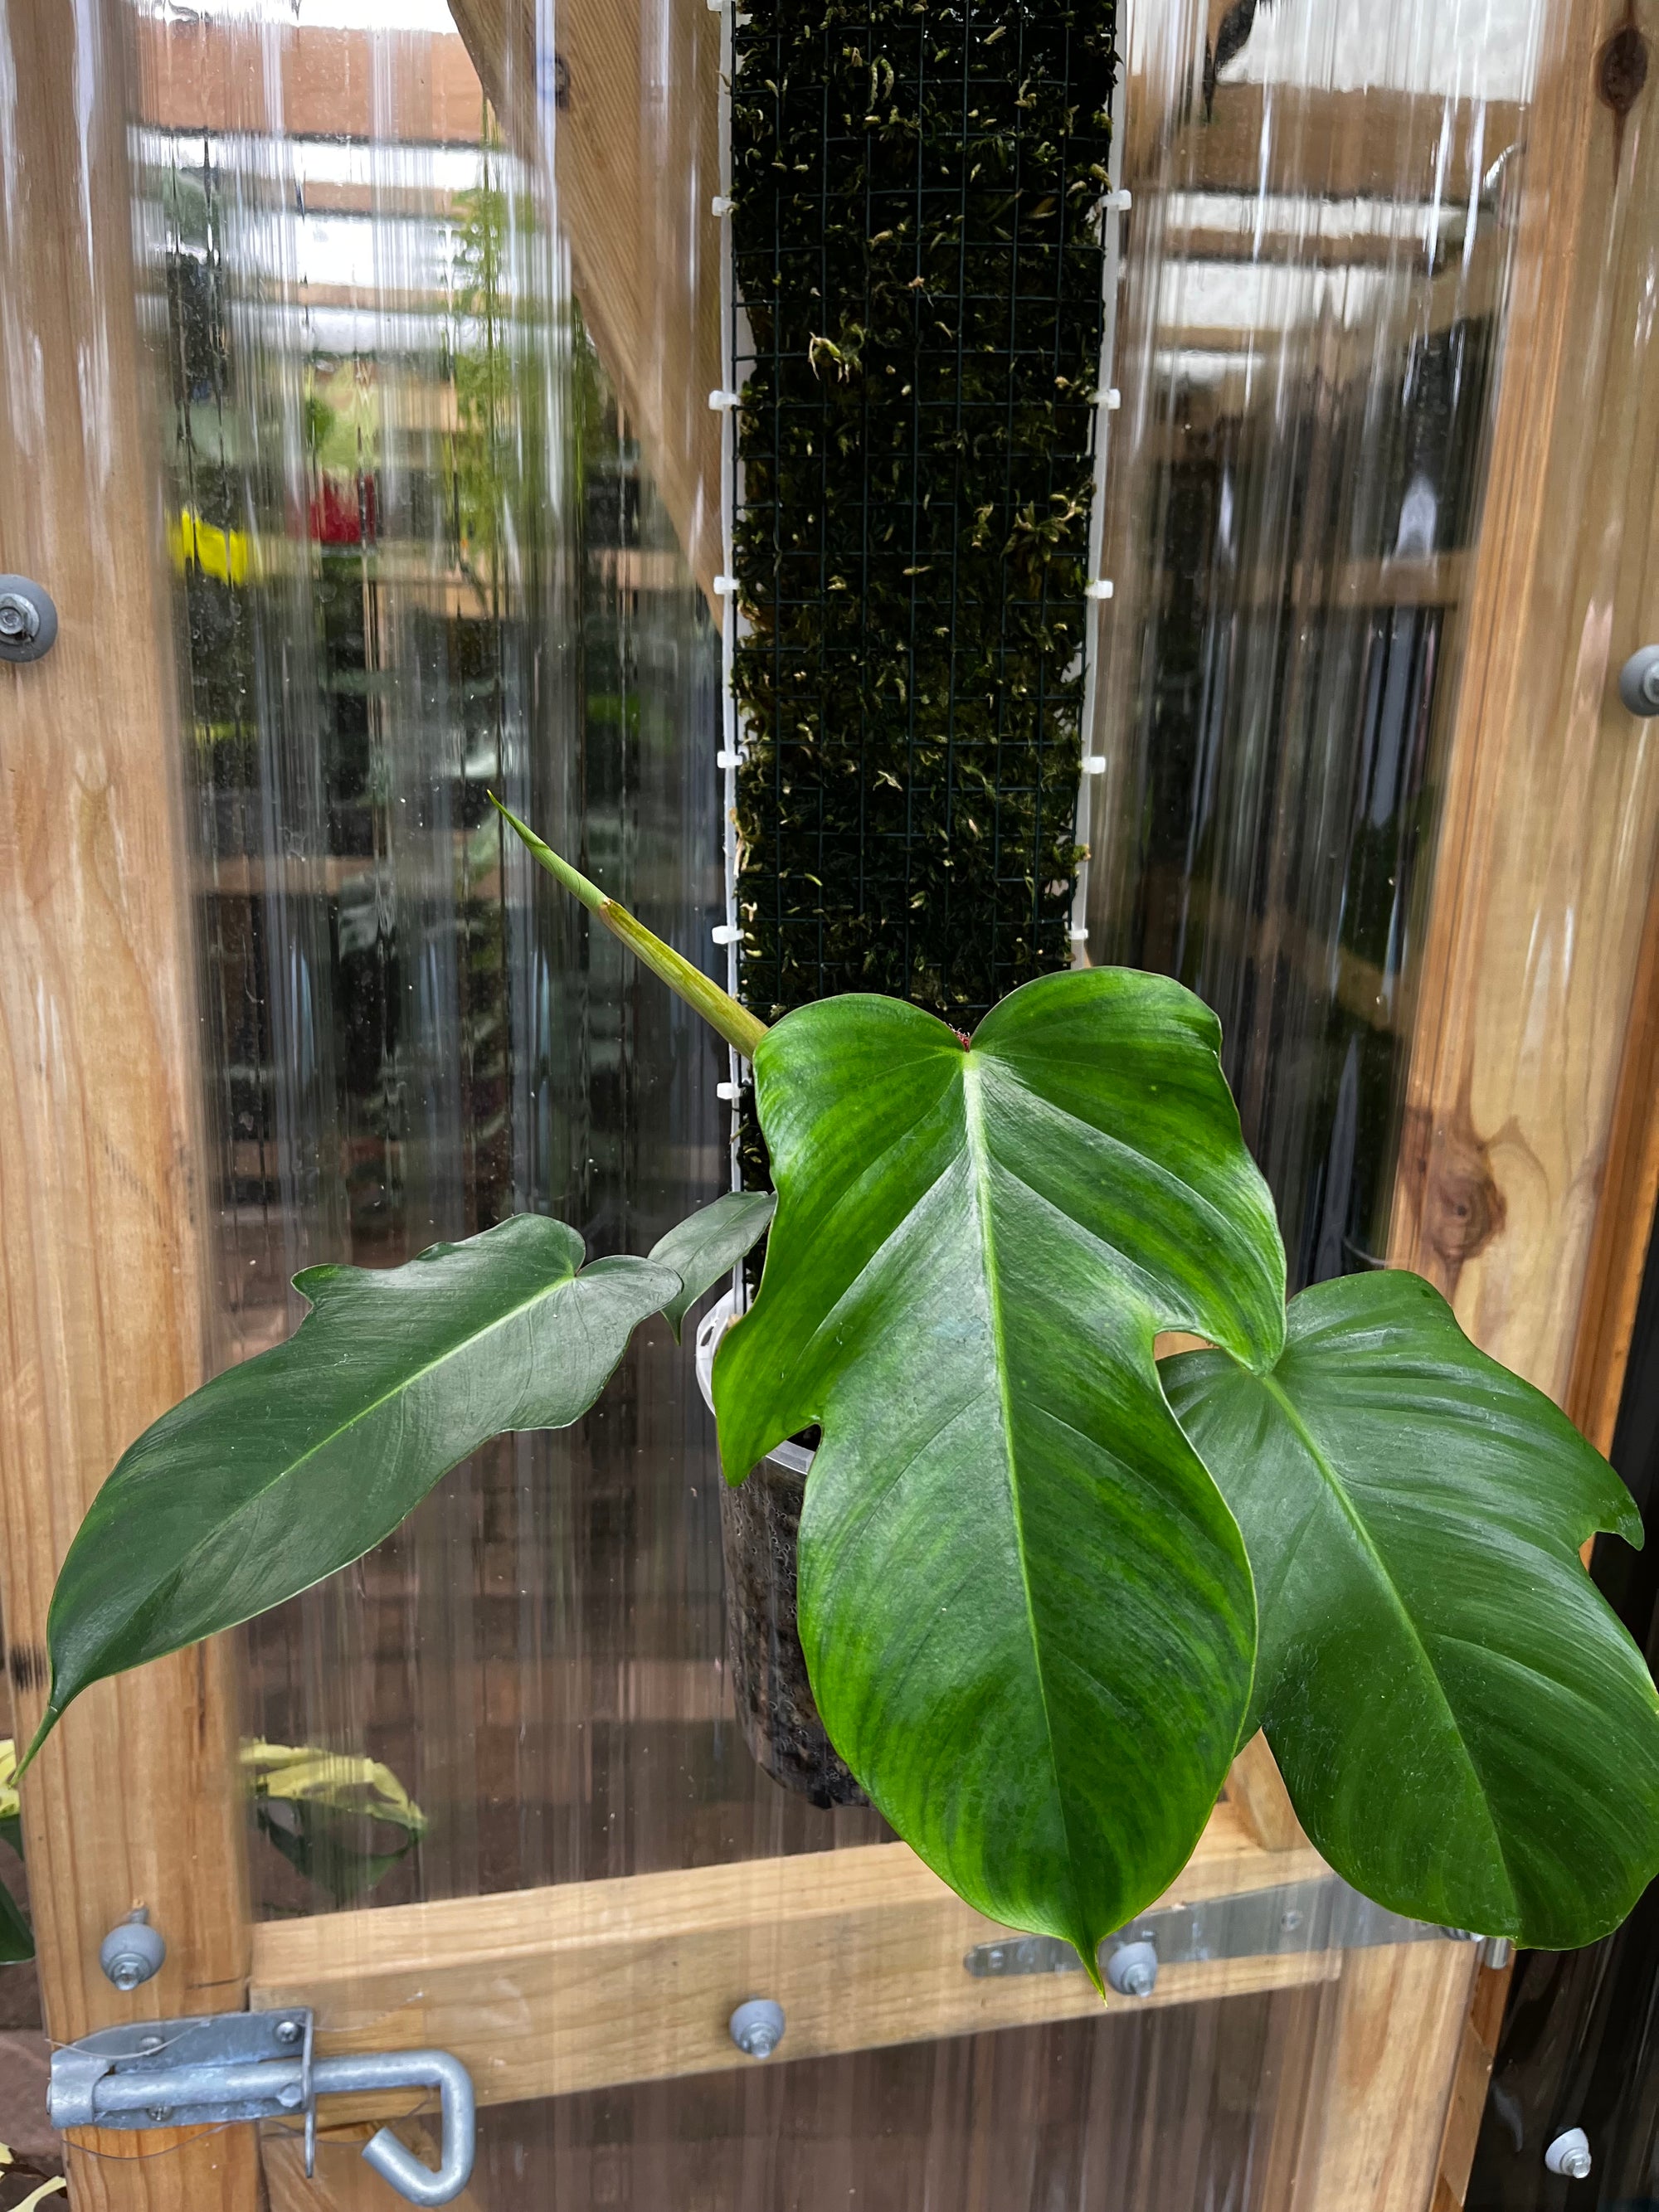 Hairy philodendron will develop extremely large leaves due to the amount of roots it can grow in the moss present in the moss pole or grow pole.